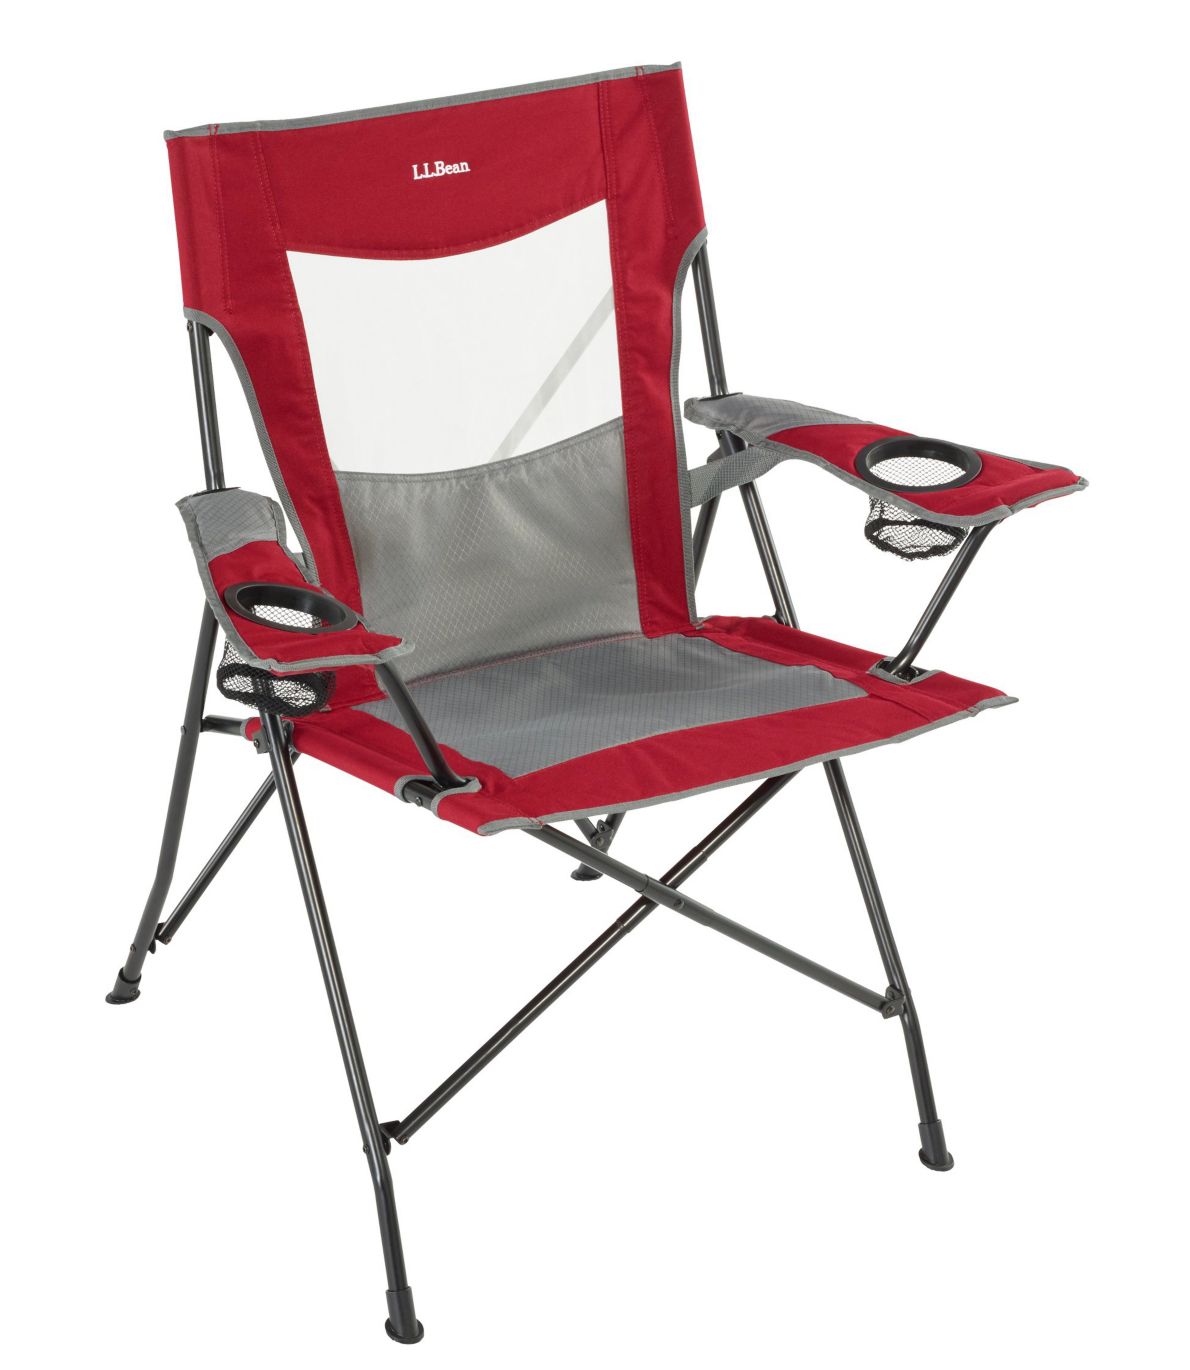 Comfort Back Camp Chair